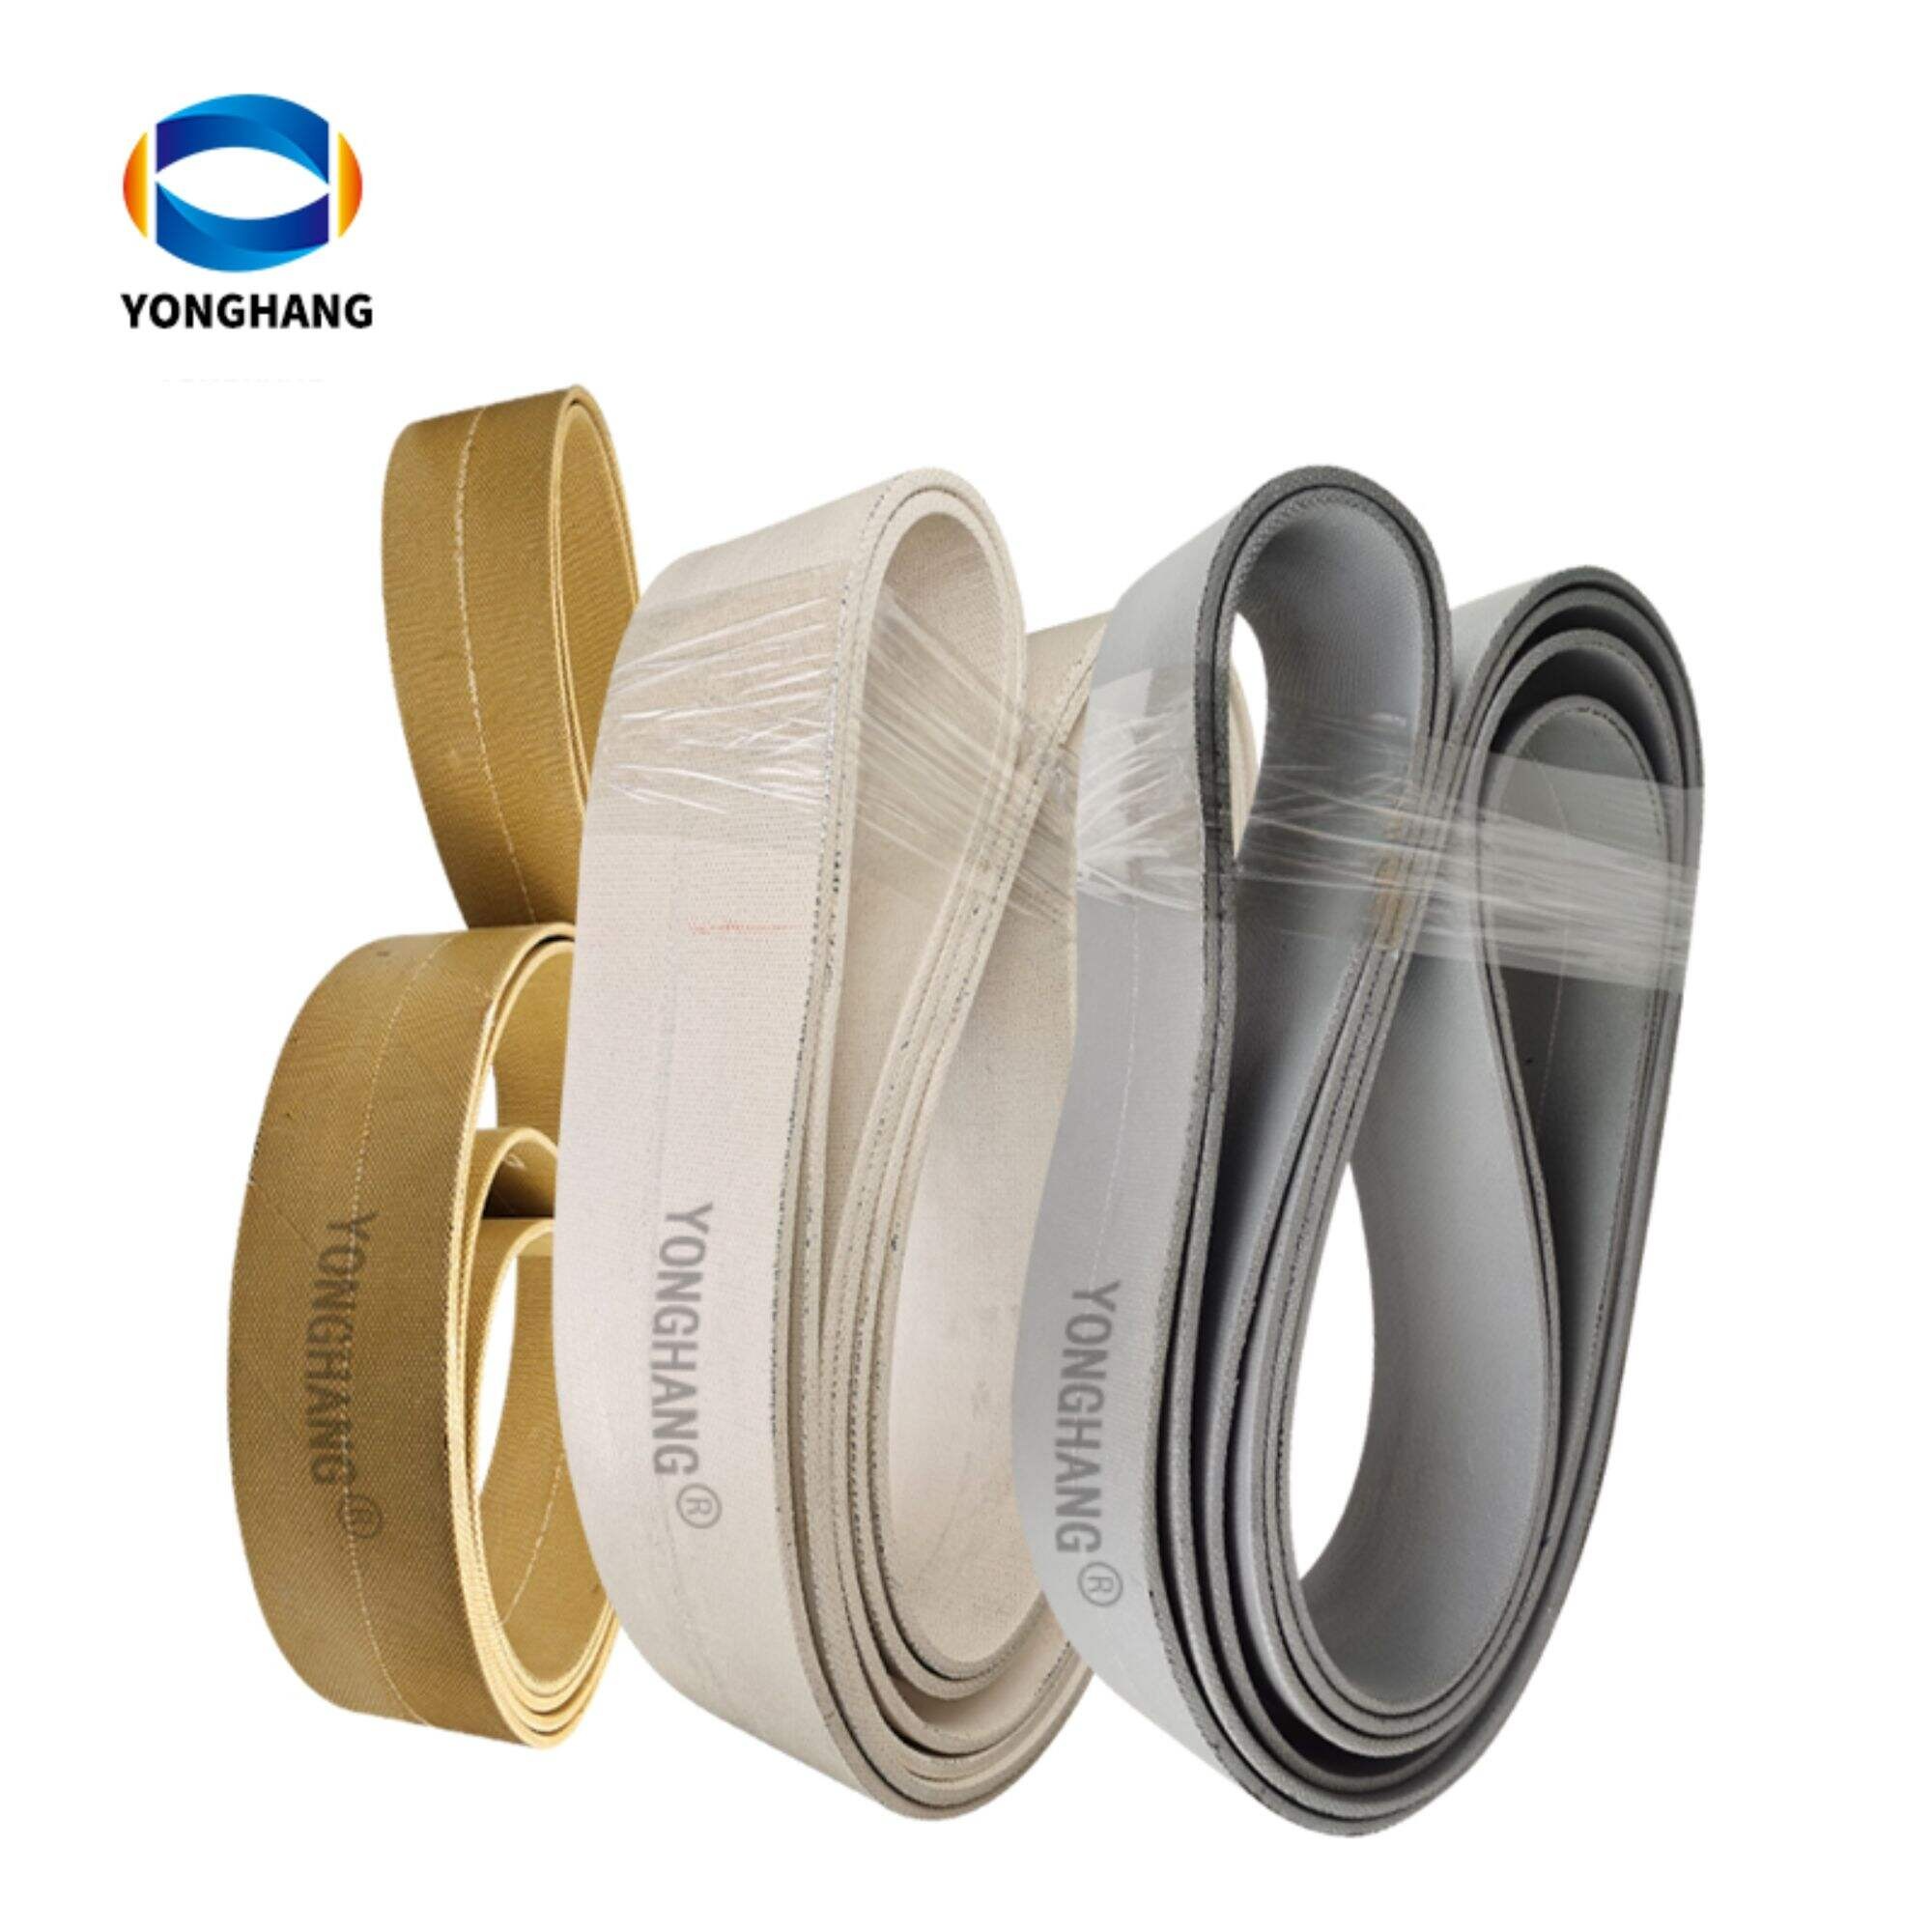 Enhance Your Machinery Performance with Yonghang Transmission's Track Belts